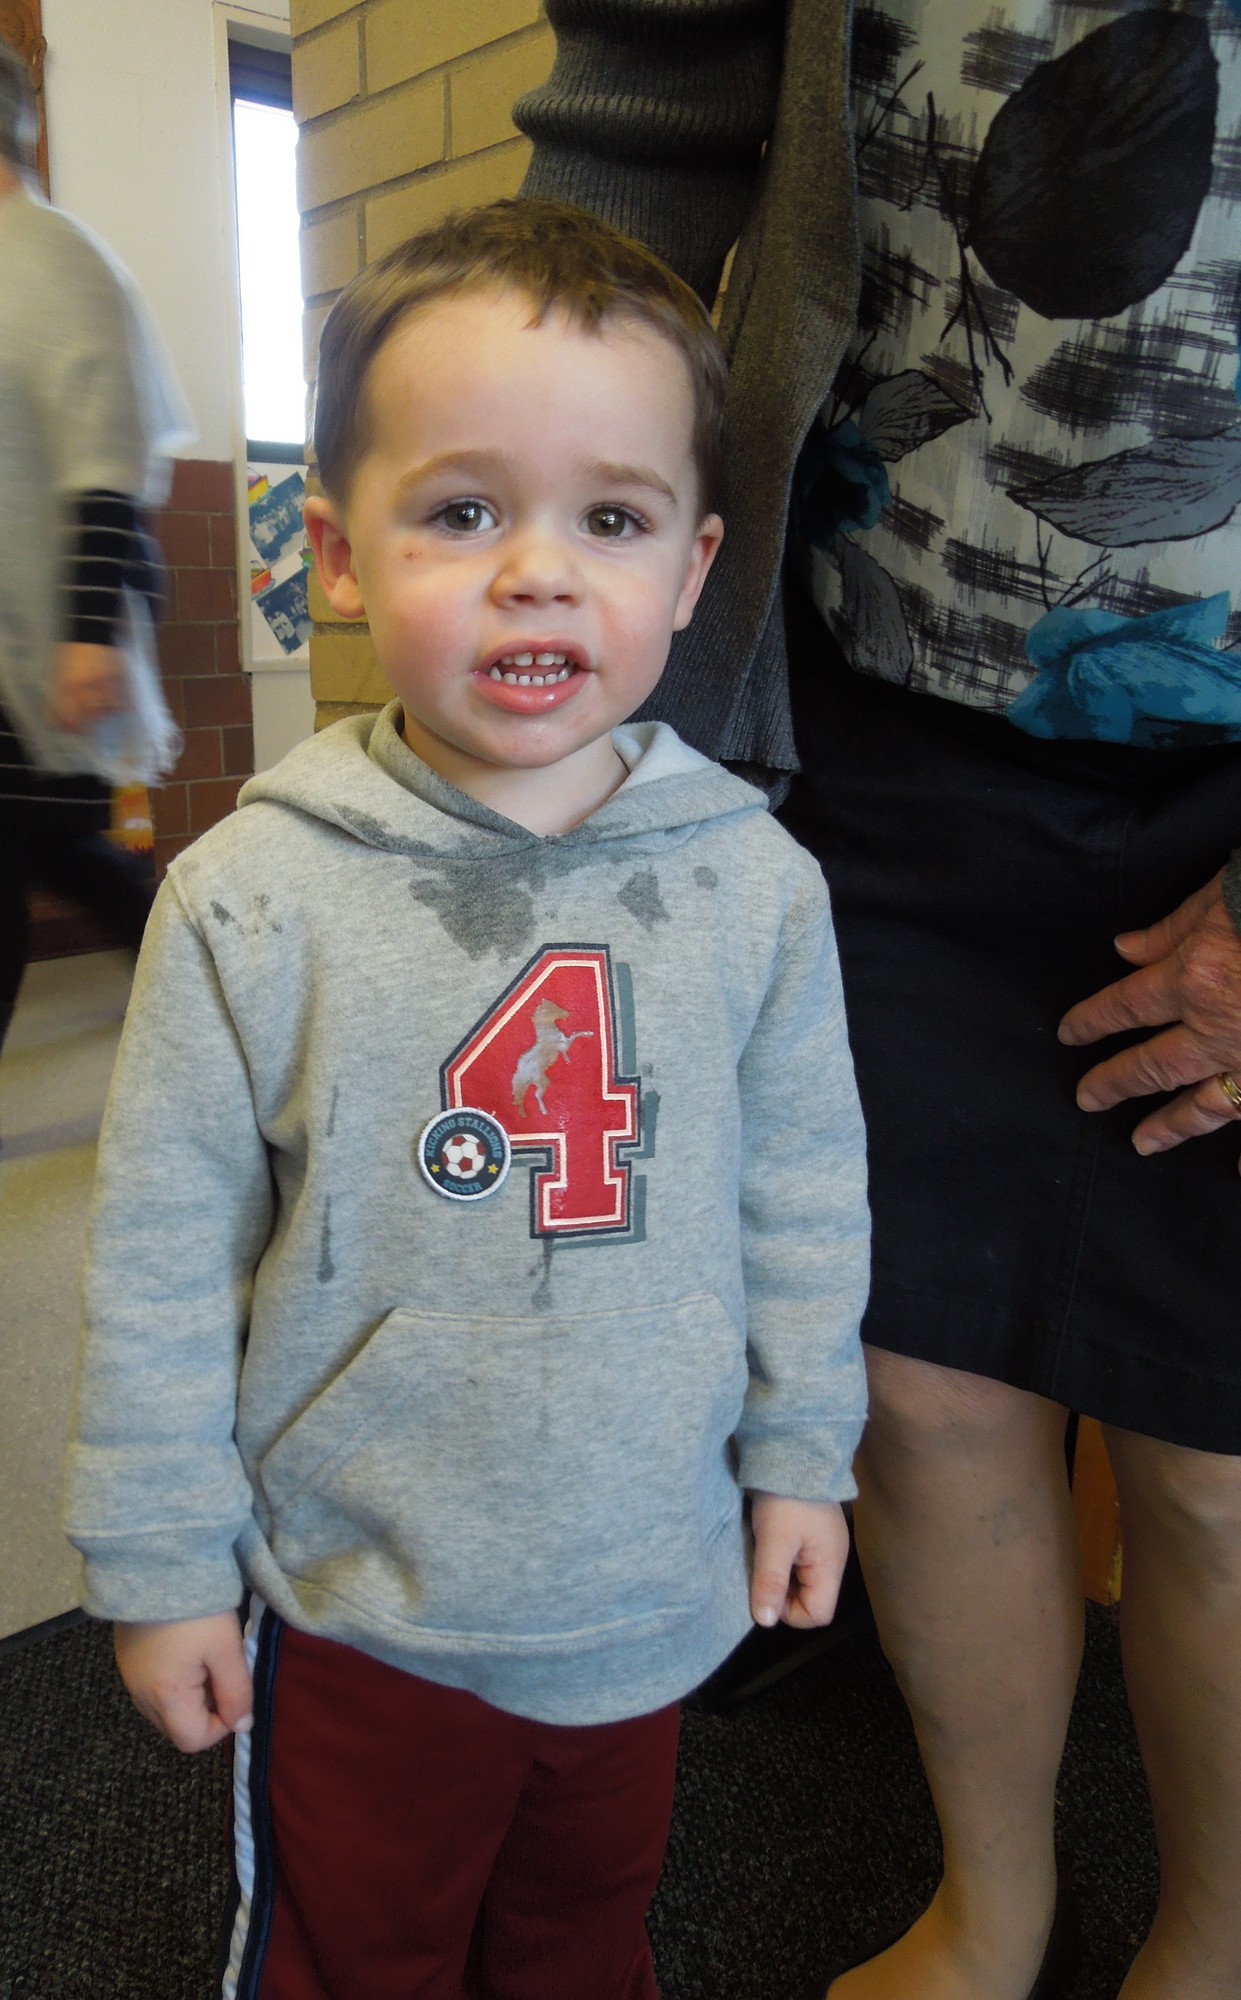 Kellan Tomczyk, 4, is planning to attend nursery school there in the fall.